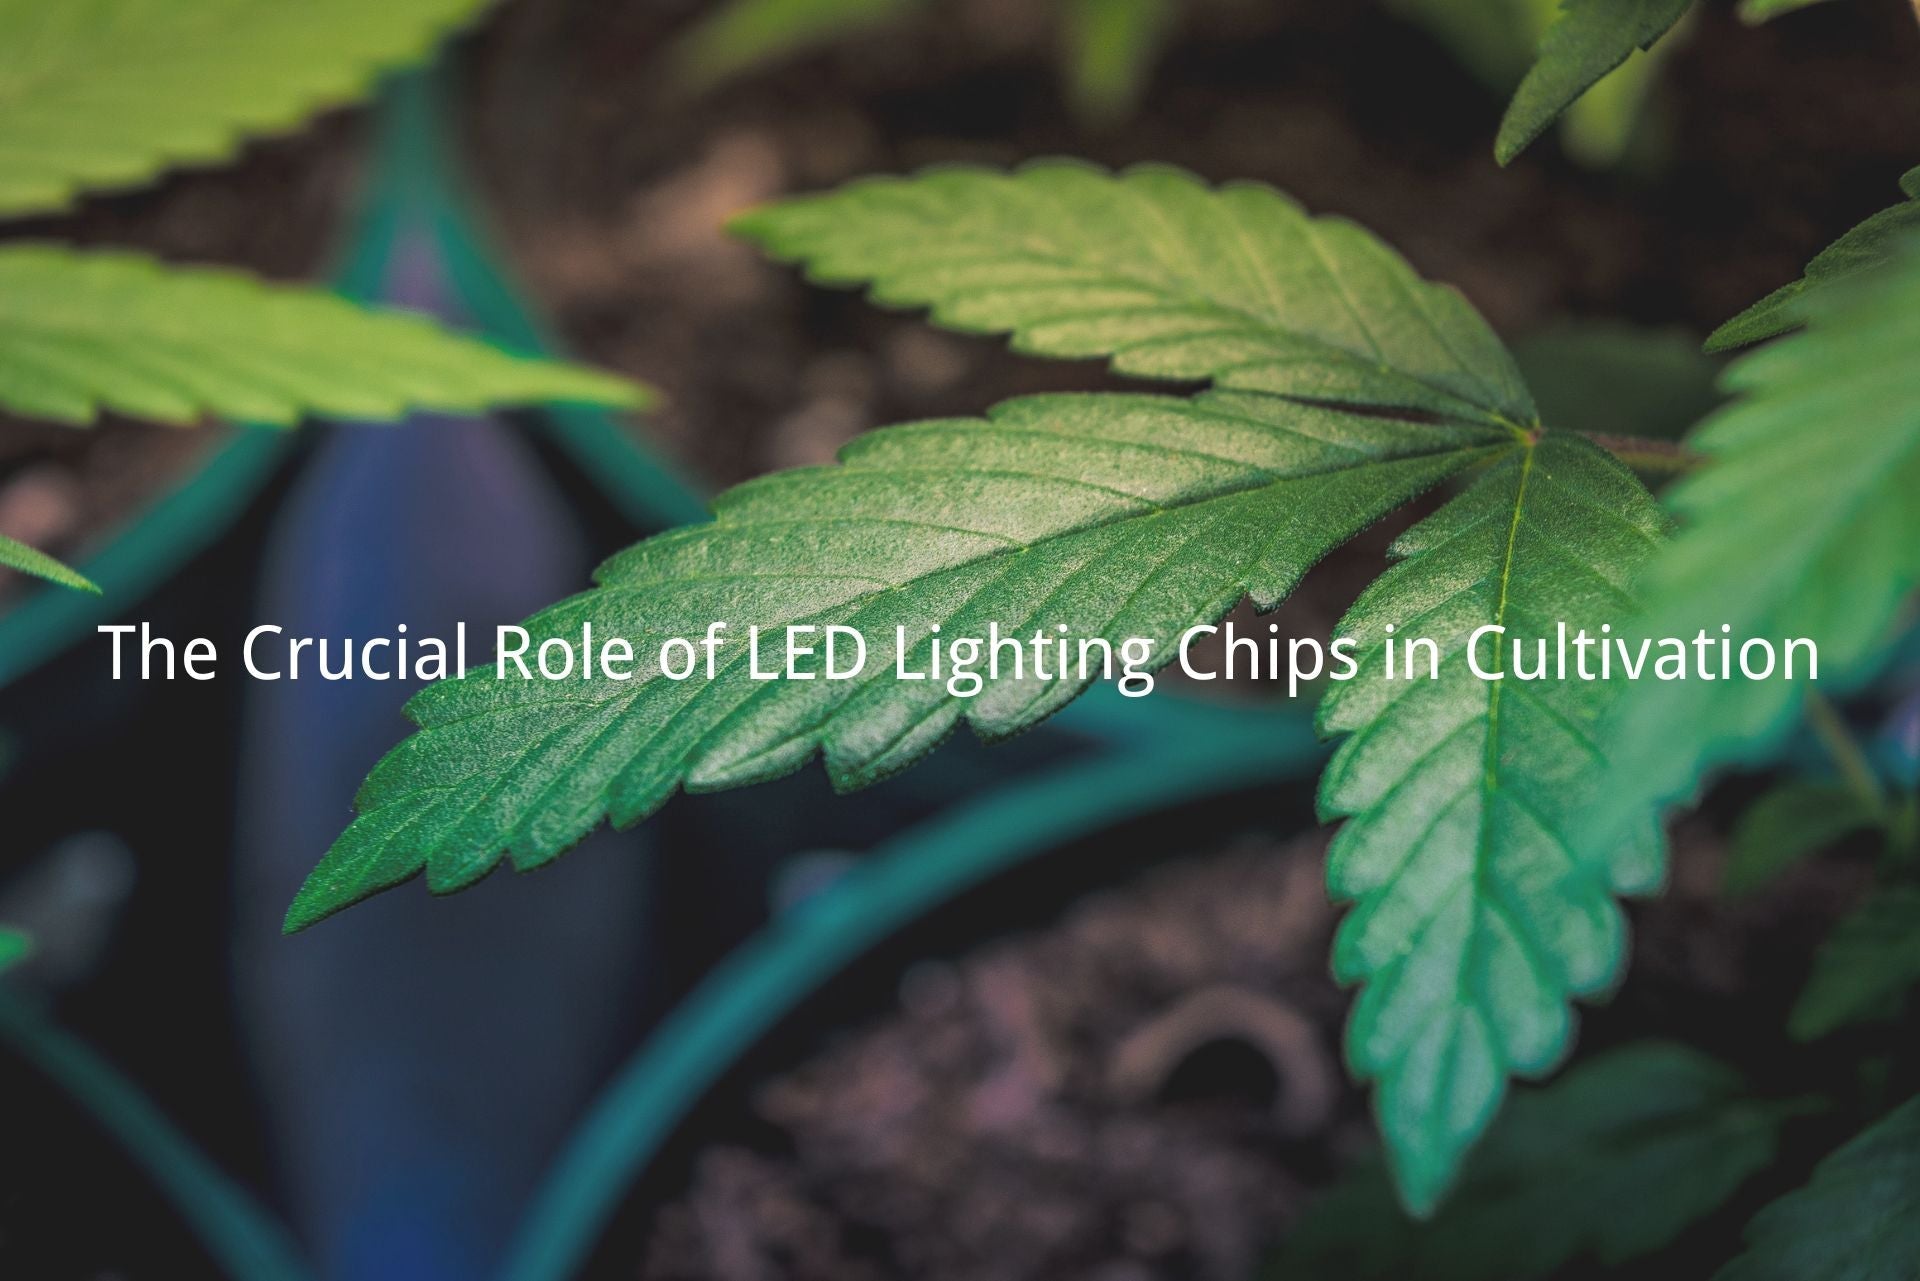 The Crucial Role of LED Lighting Chips in Cultivation